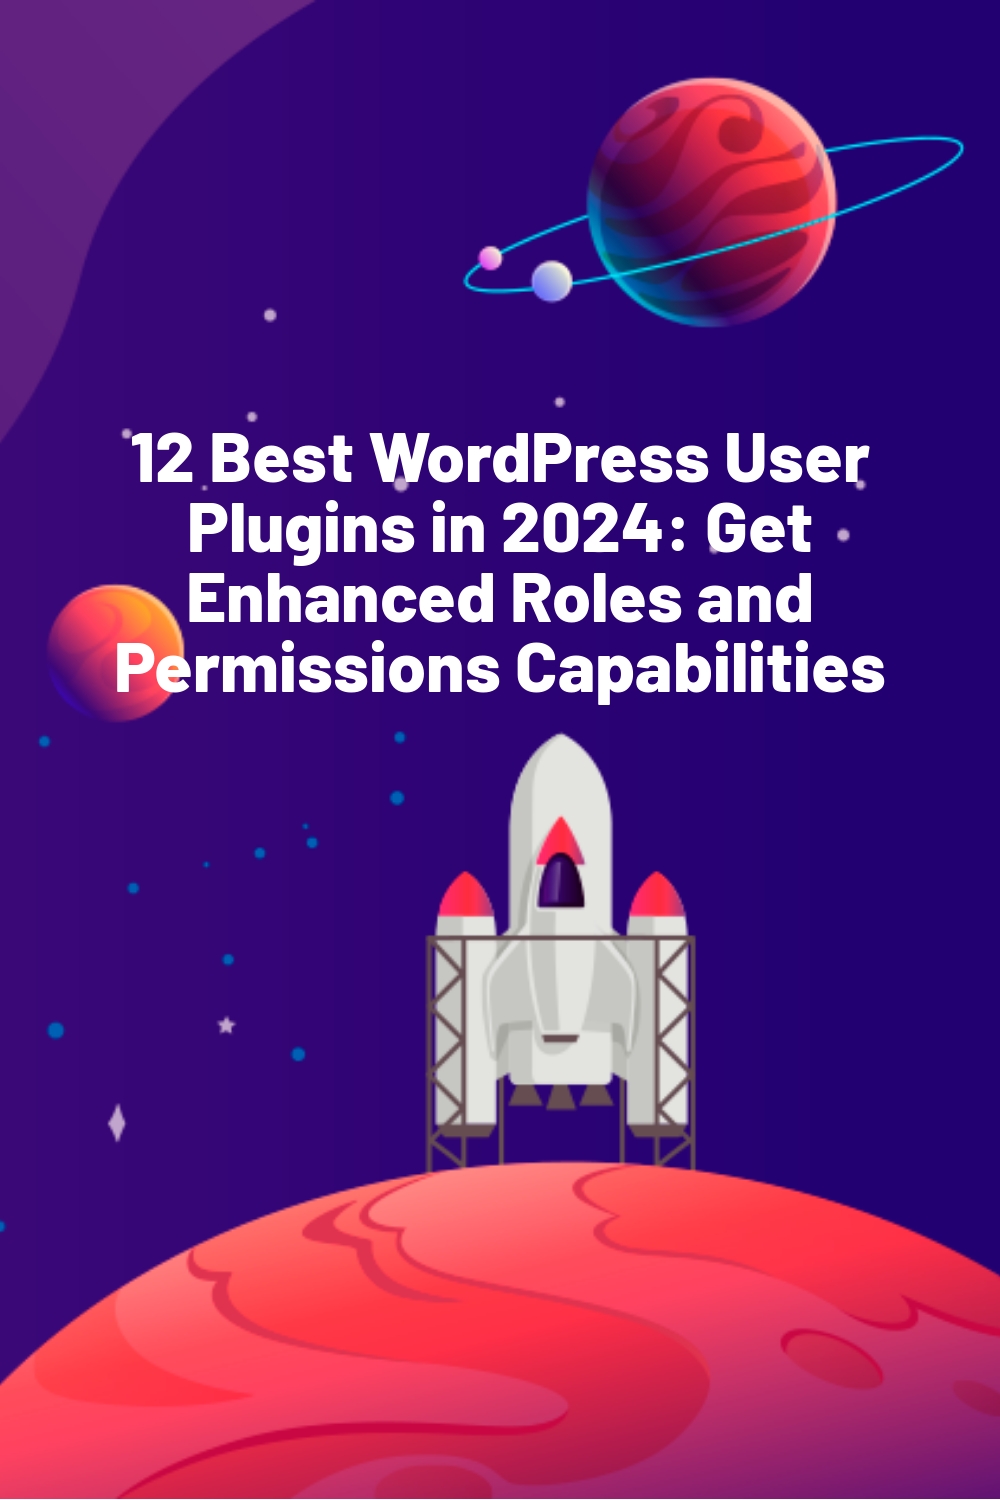 12 Best WordPress User Plugins in 2024: Get Enhanced Roles and Permissions Capabilities